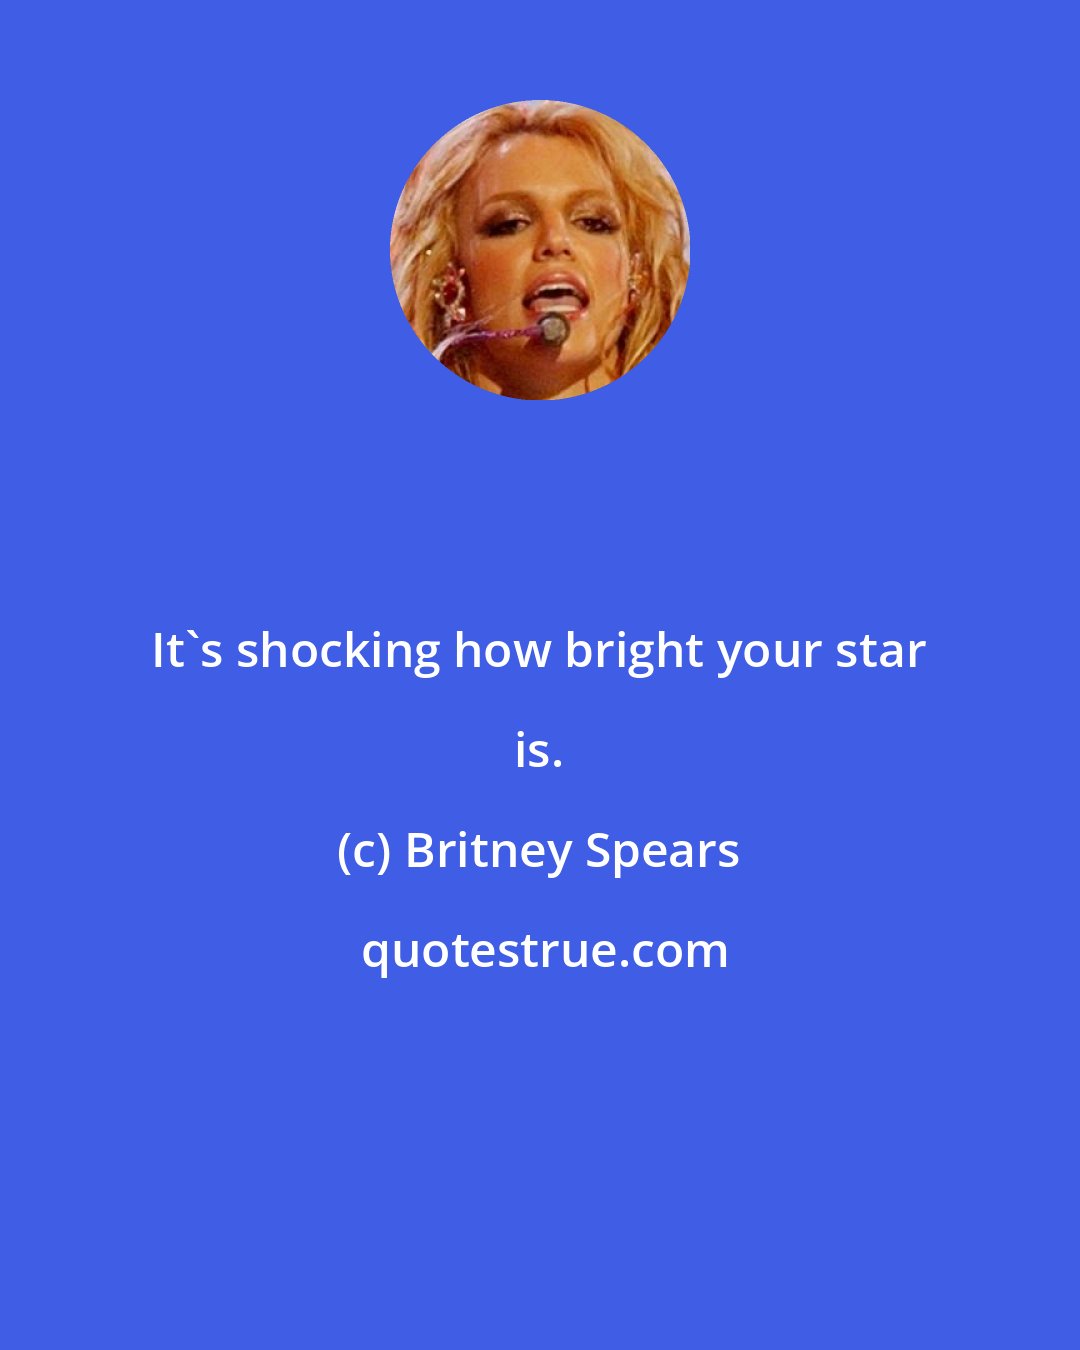 Britney Spears: It's shocking how bright your star is.